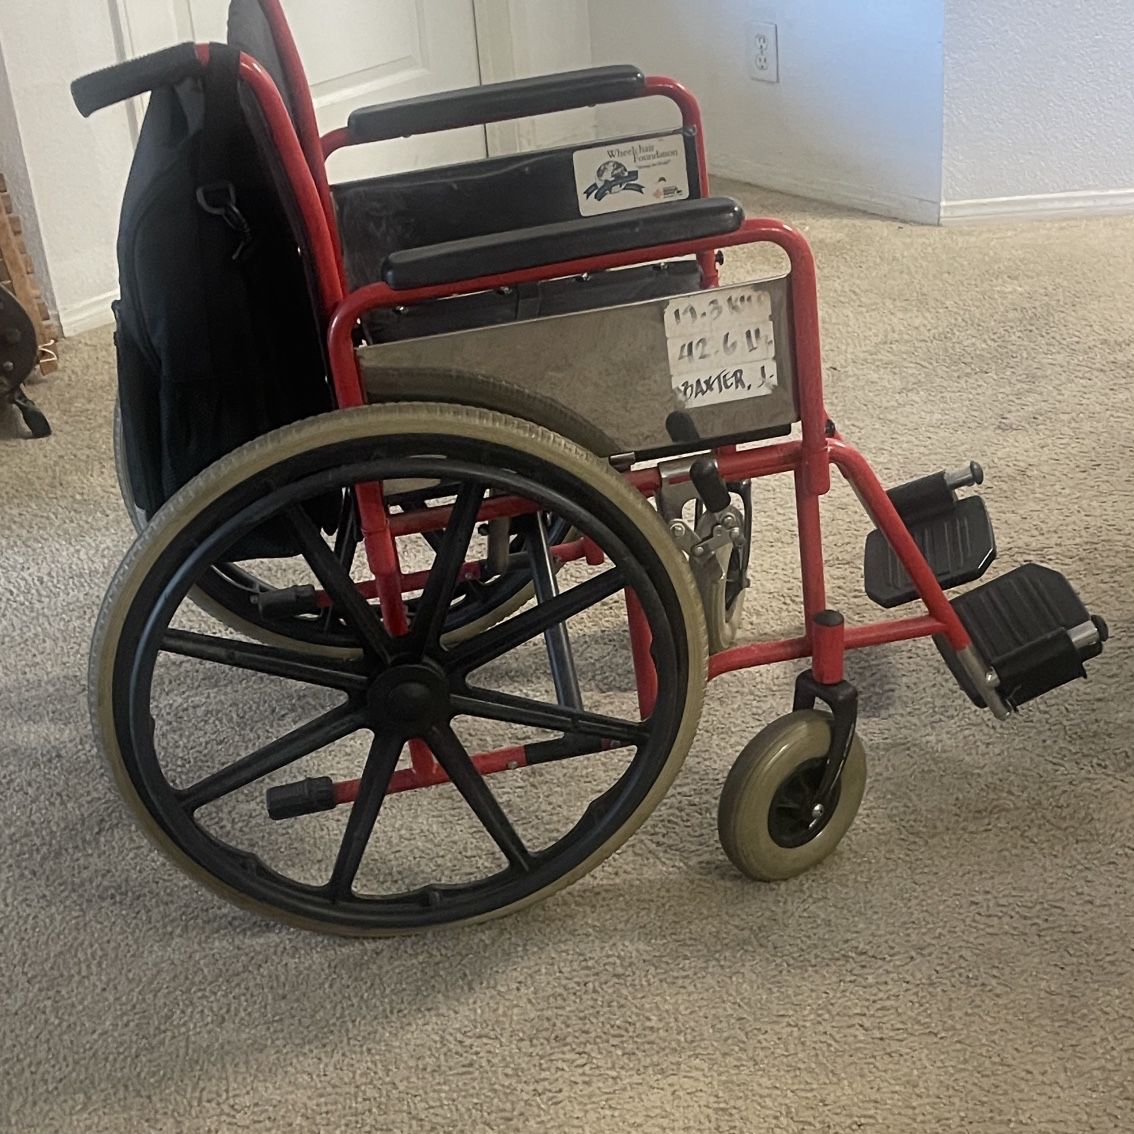 Wheelchair, Gel Seat, And Carrying Bag